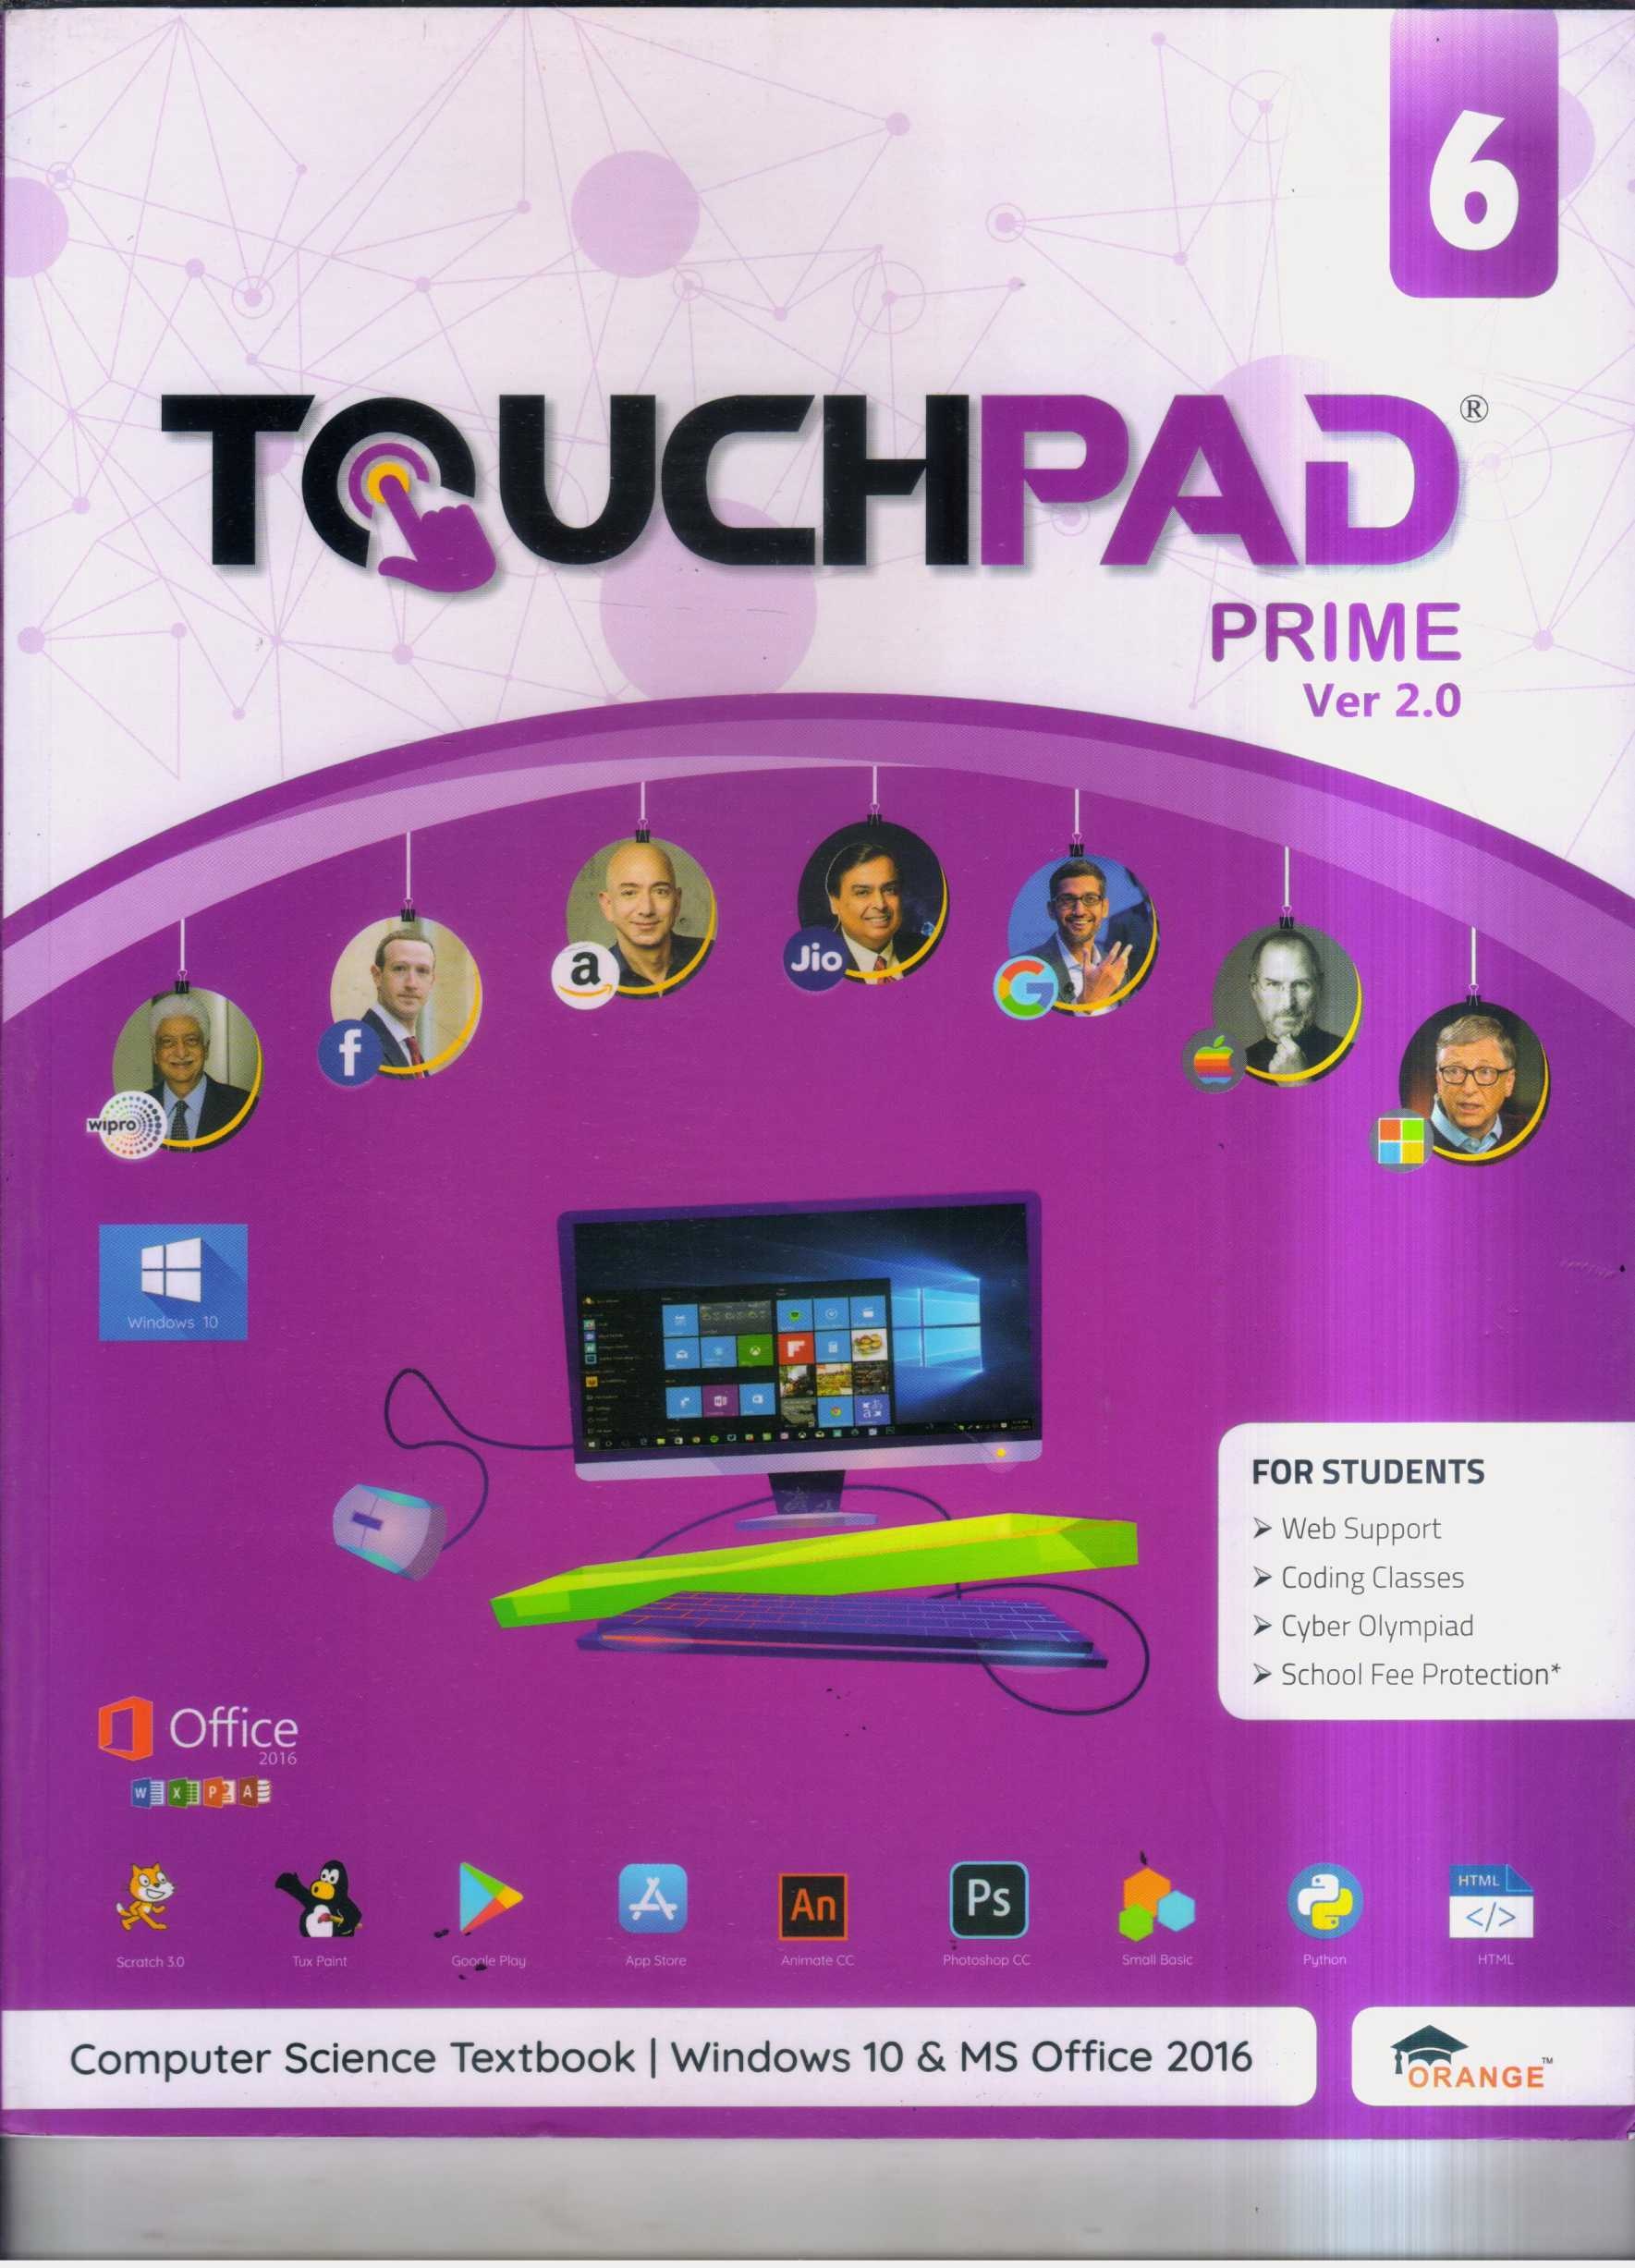 TOUCHPAD Prime Ver 2.0 Class 6